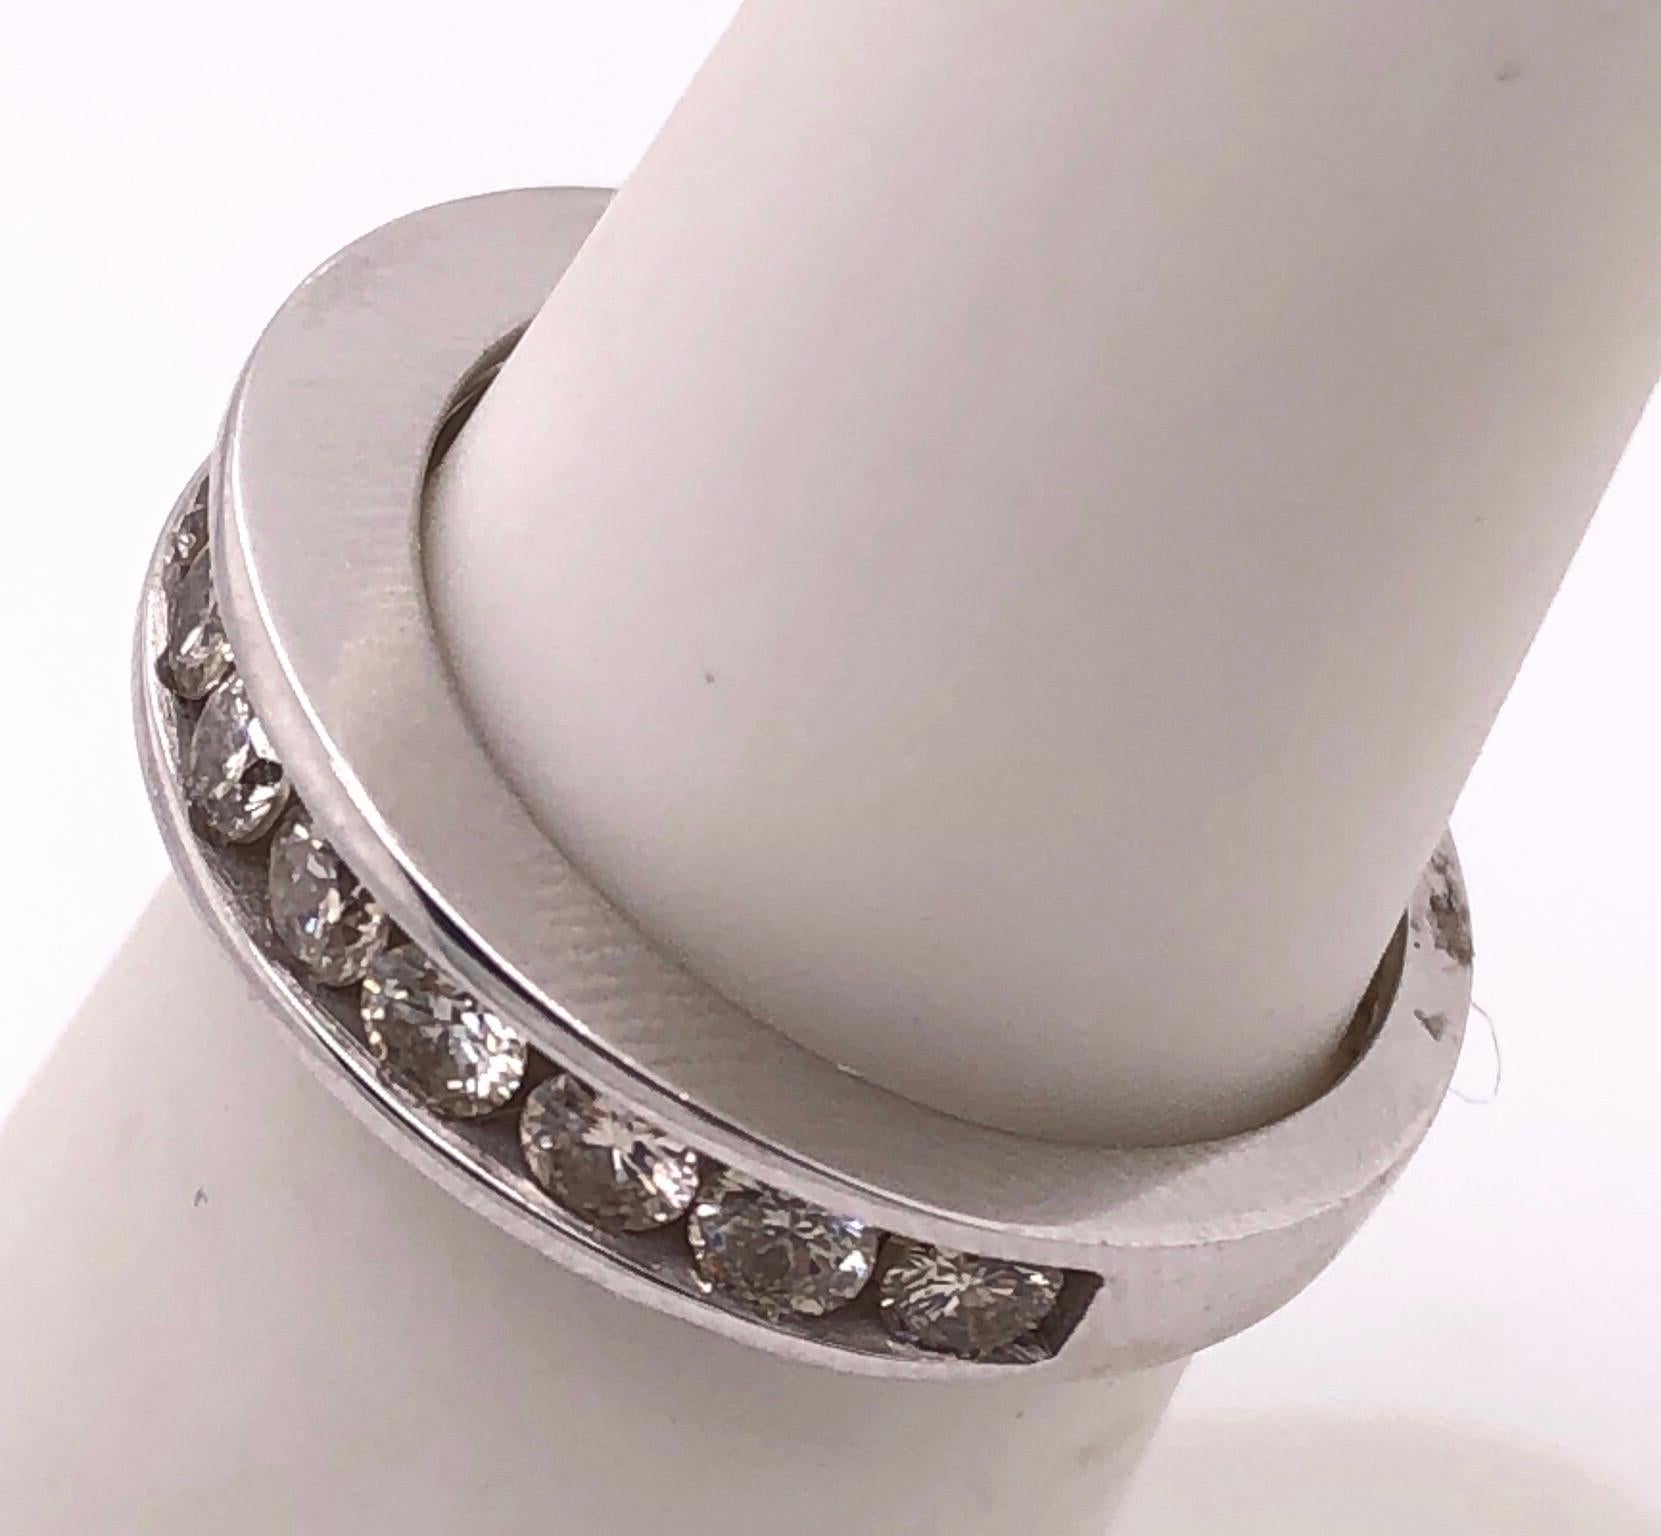 14 karat White Gold Band/Bridal ring with Diamonds 1.20 Total Diamond Weight.
Size 5
3.48 grams total weight.